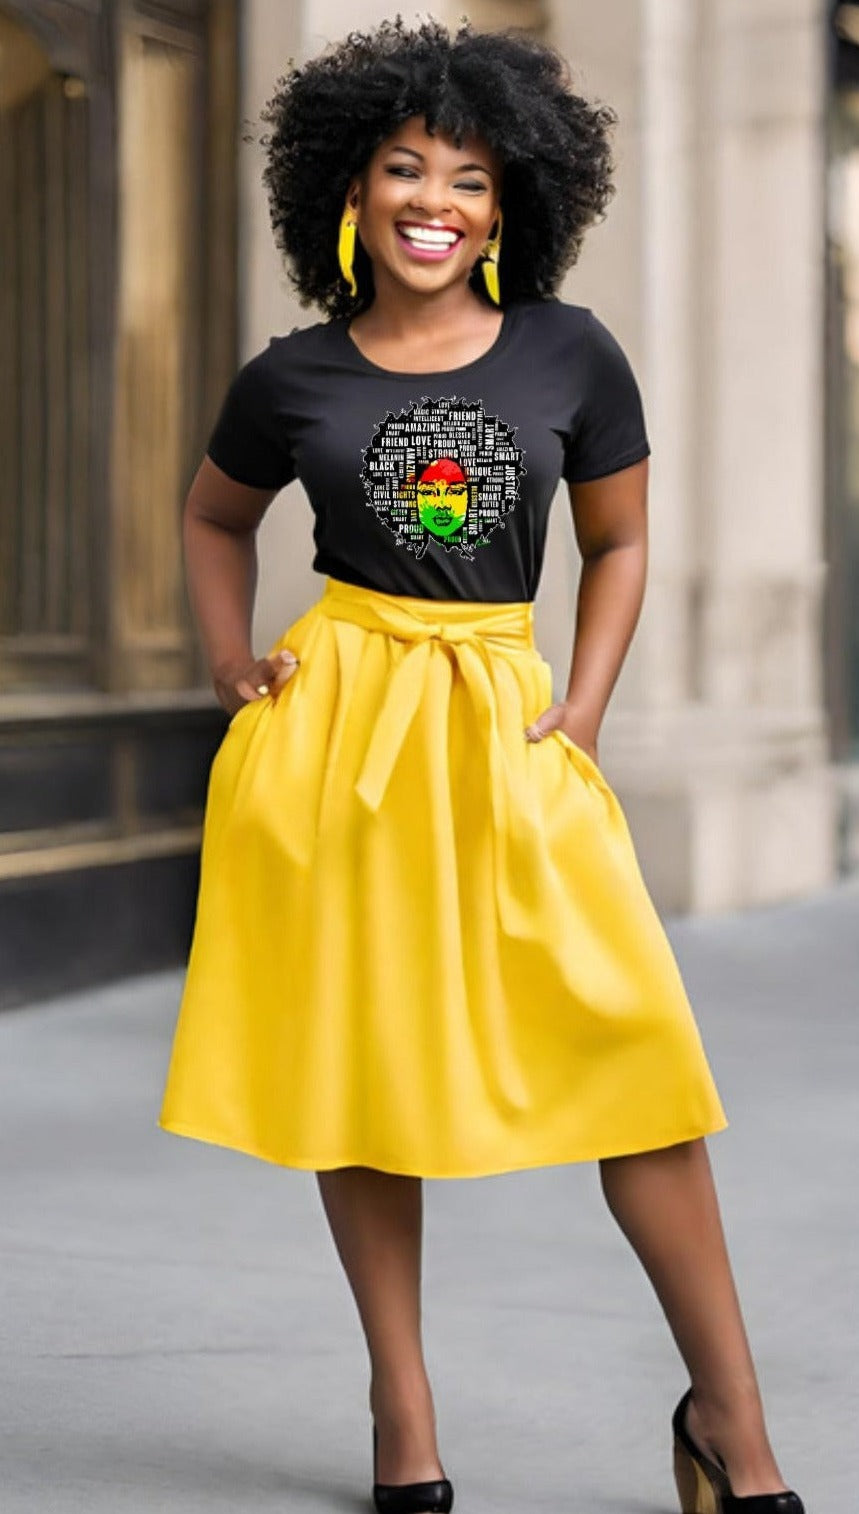 a women wearing a short sleeve black t-shirt with a afro filled with many words, friend, justice, smart, love, proud, amazing, unique, strong, etc with Africa in red black and green in the background